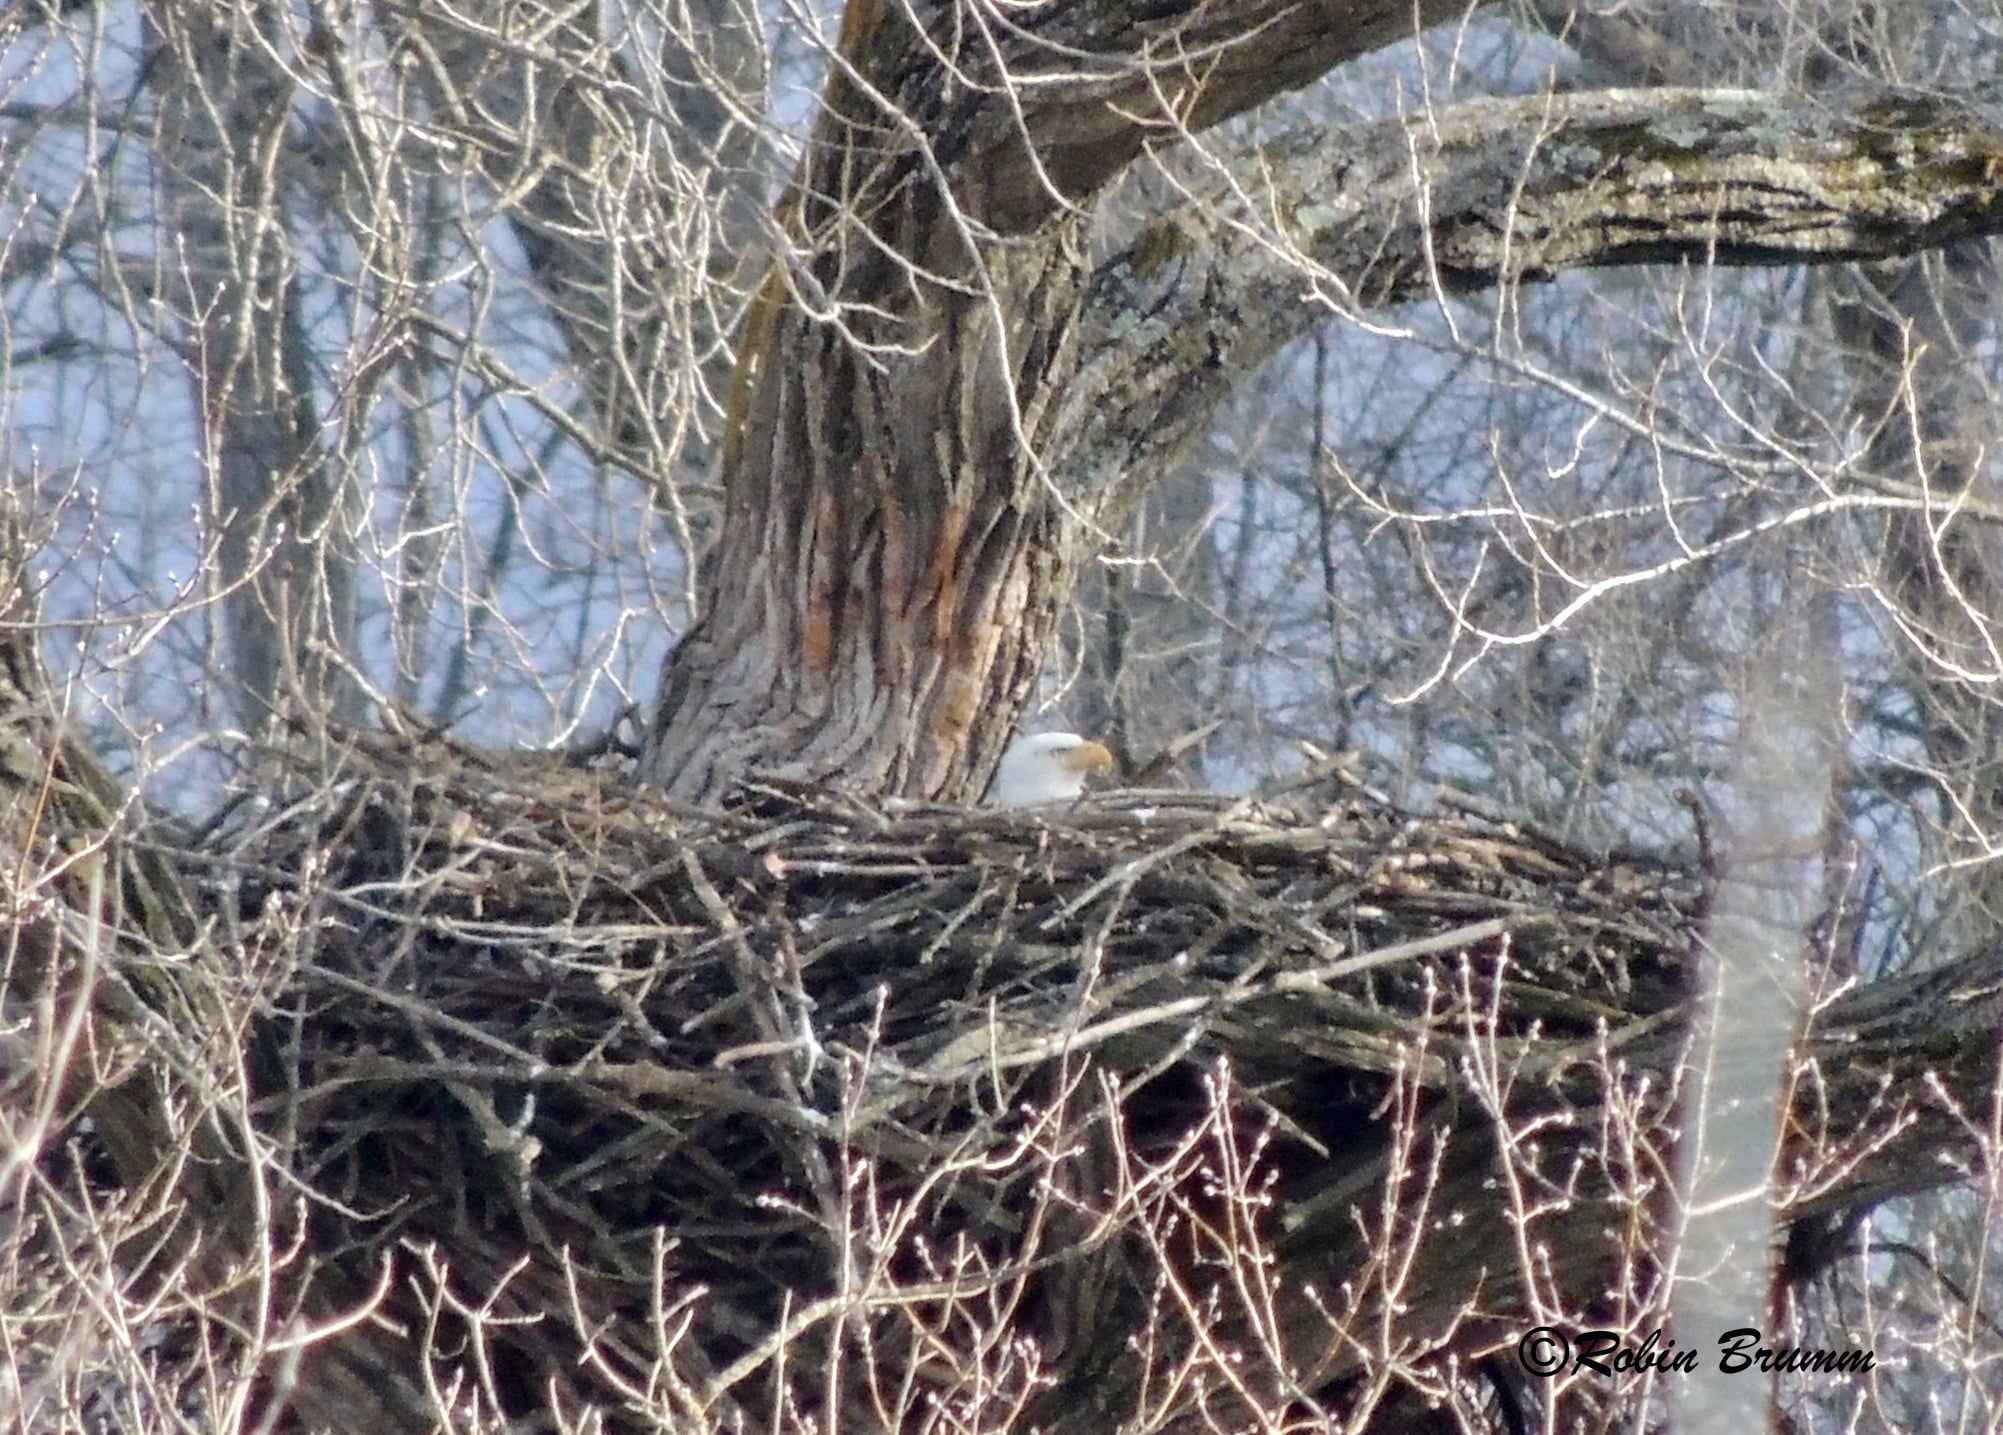 February 20, 2022: A parent incubating at the Bobway nest.